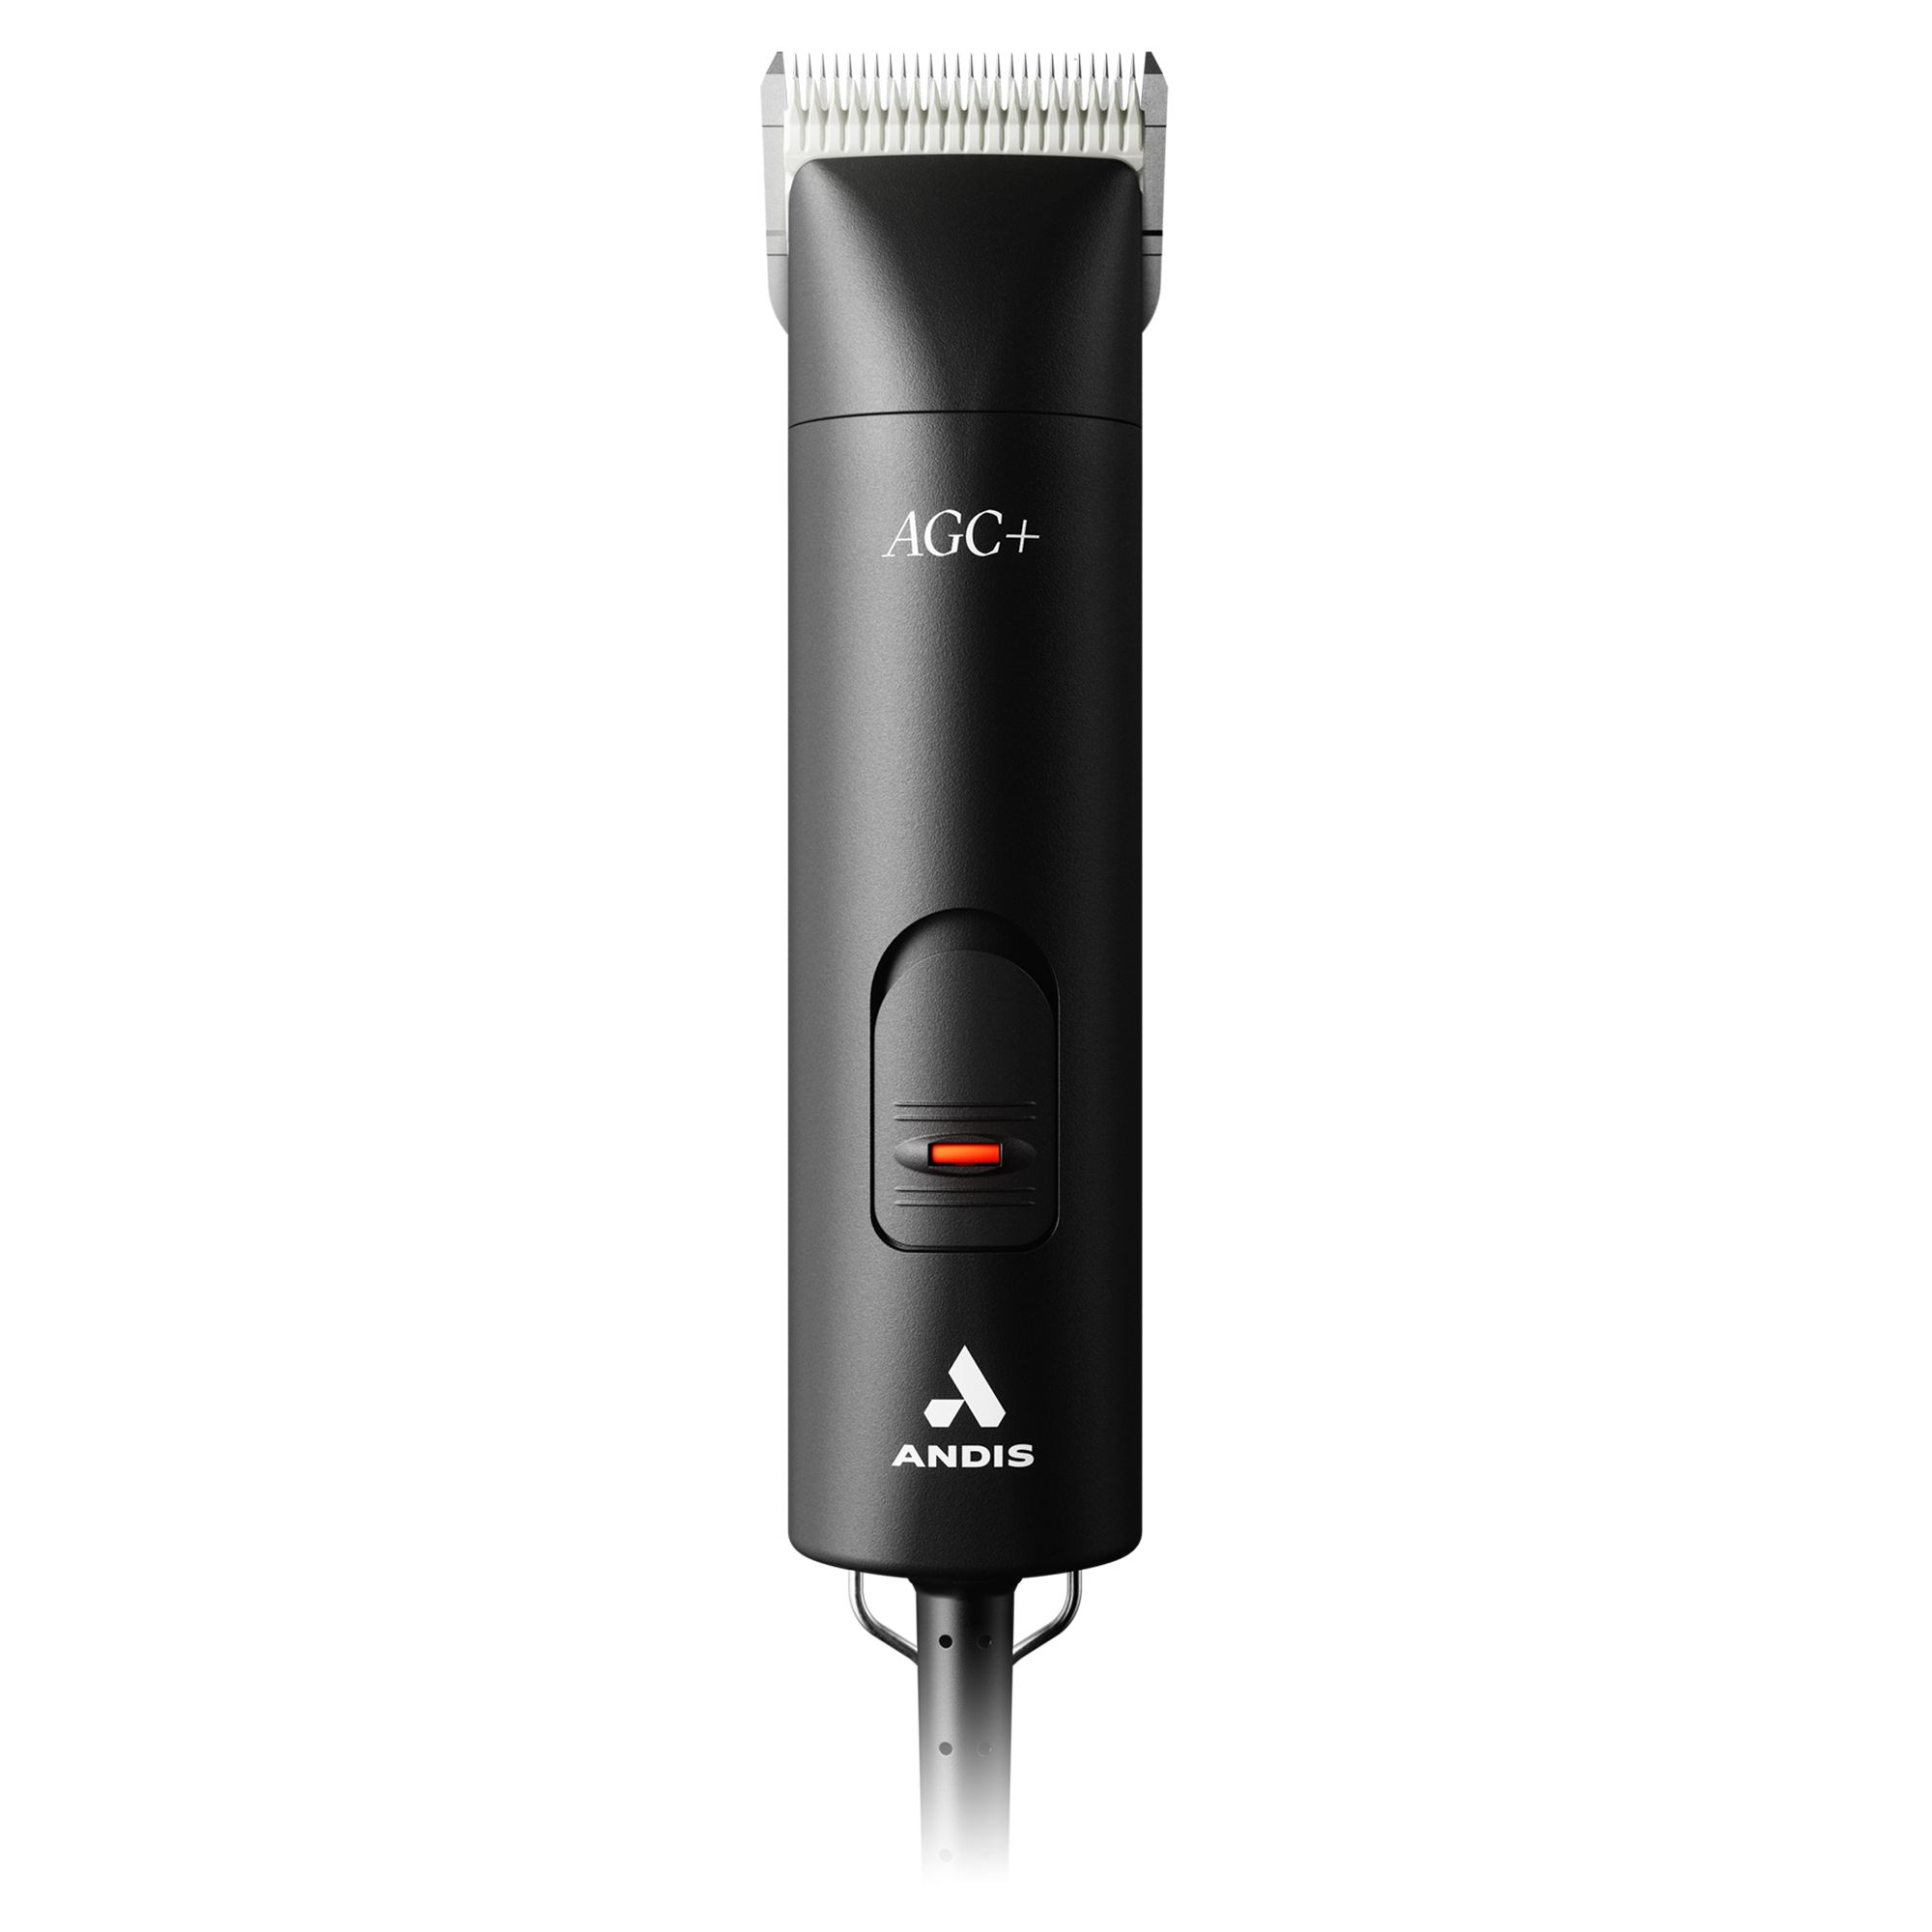 andis hair clipper kit